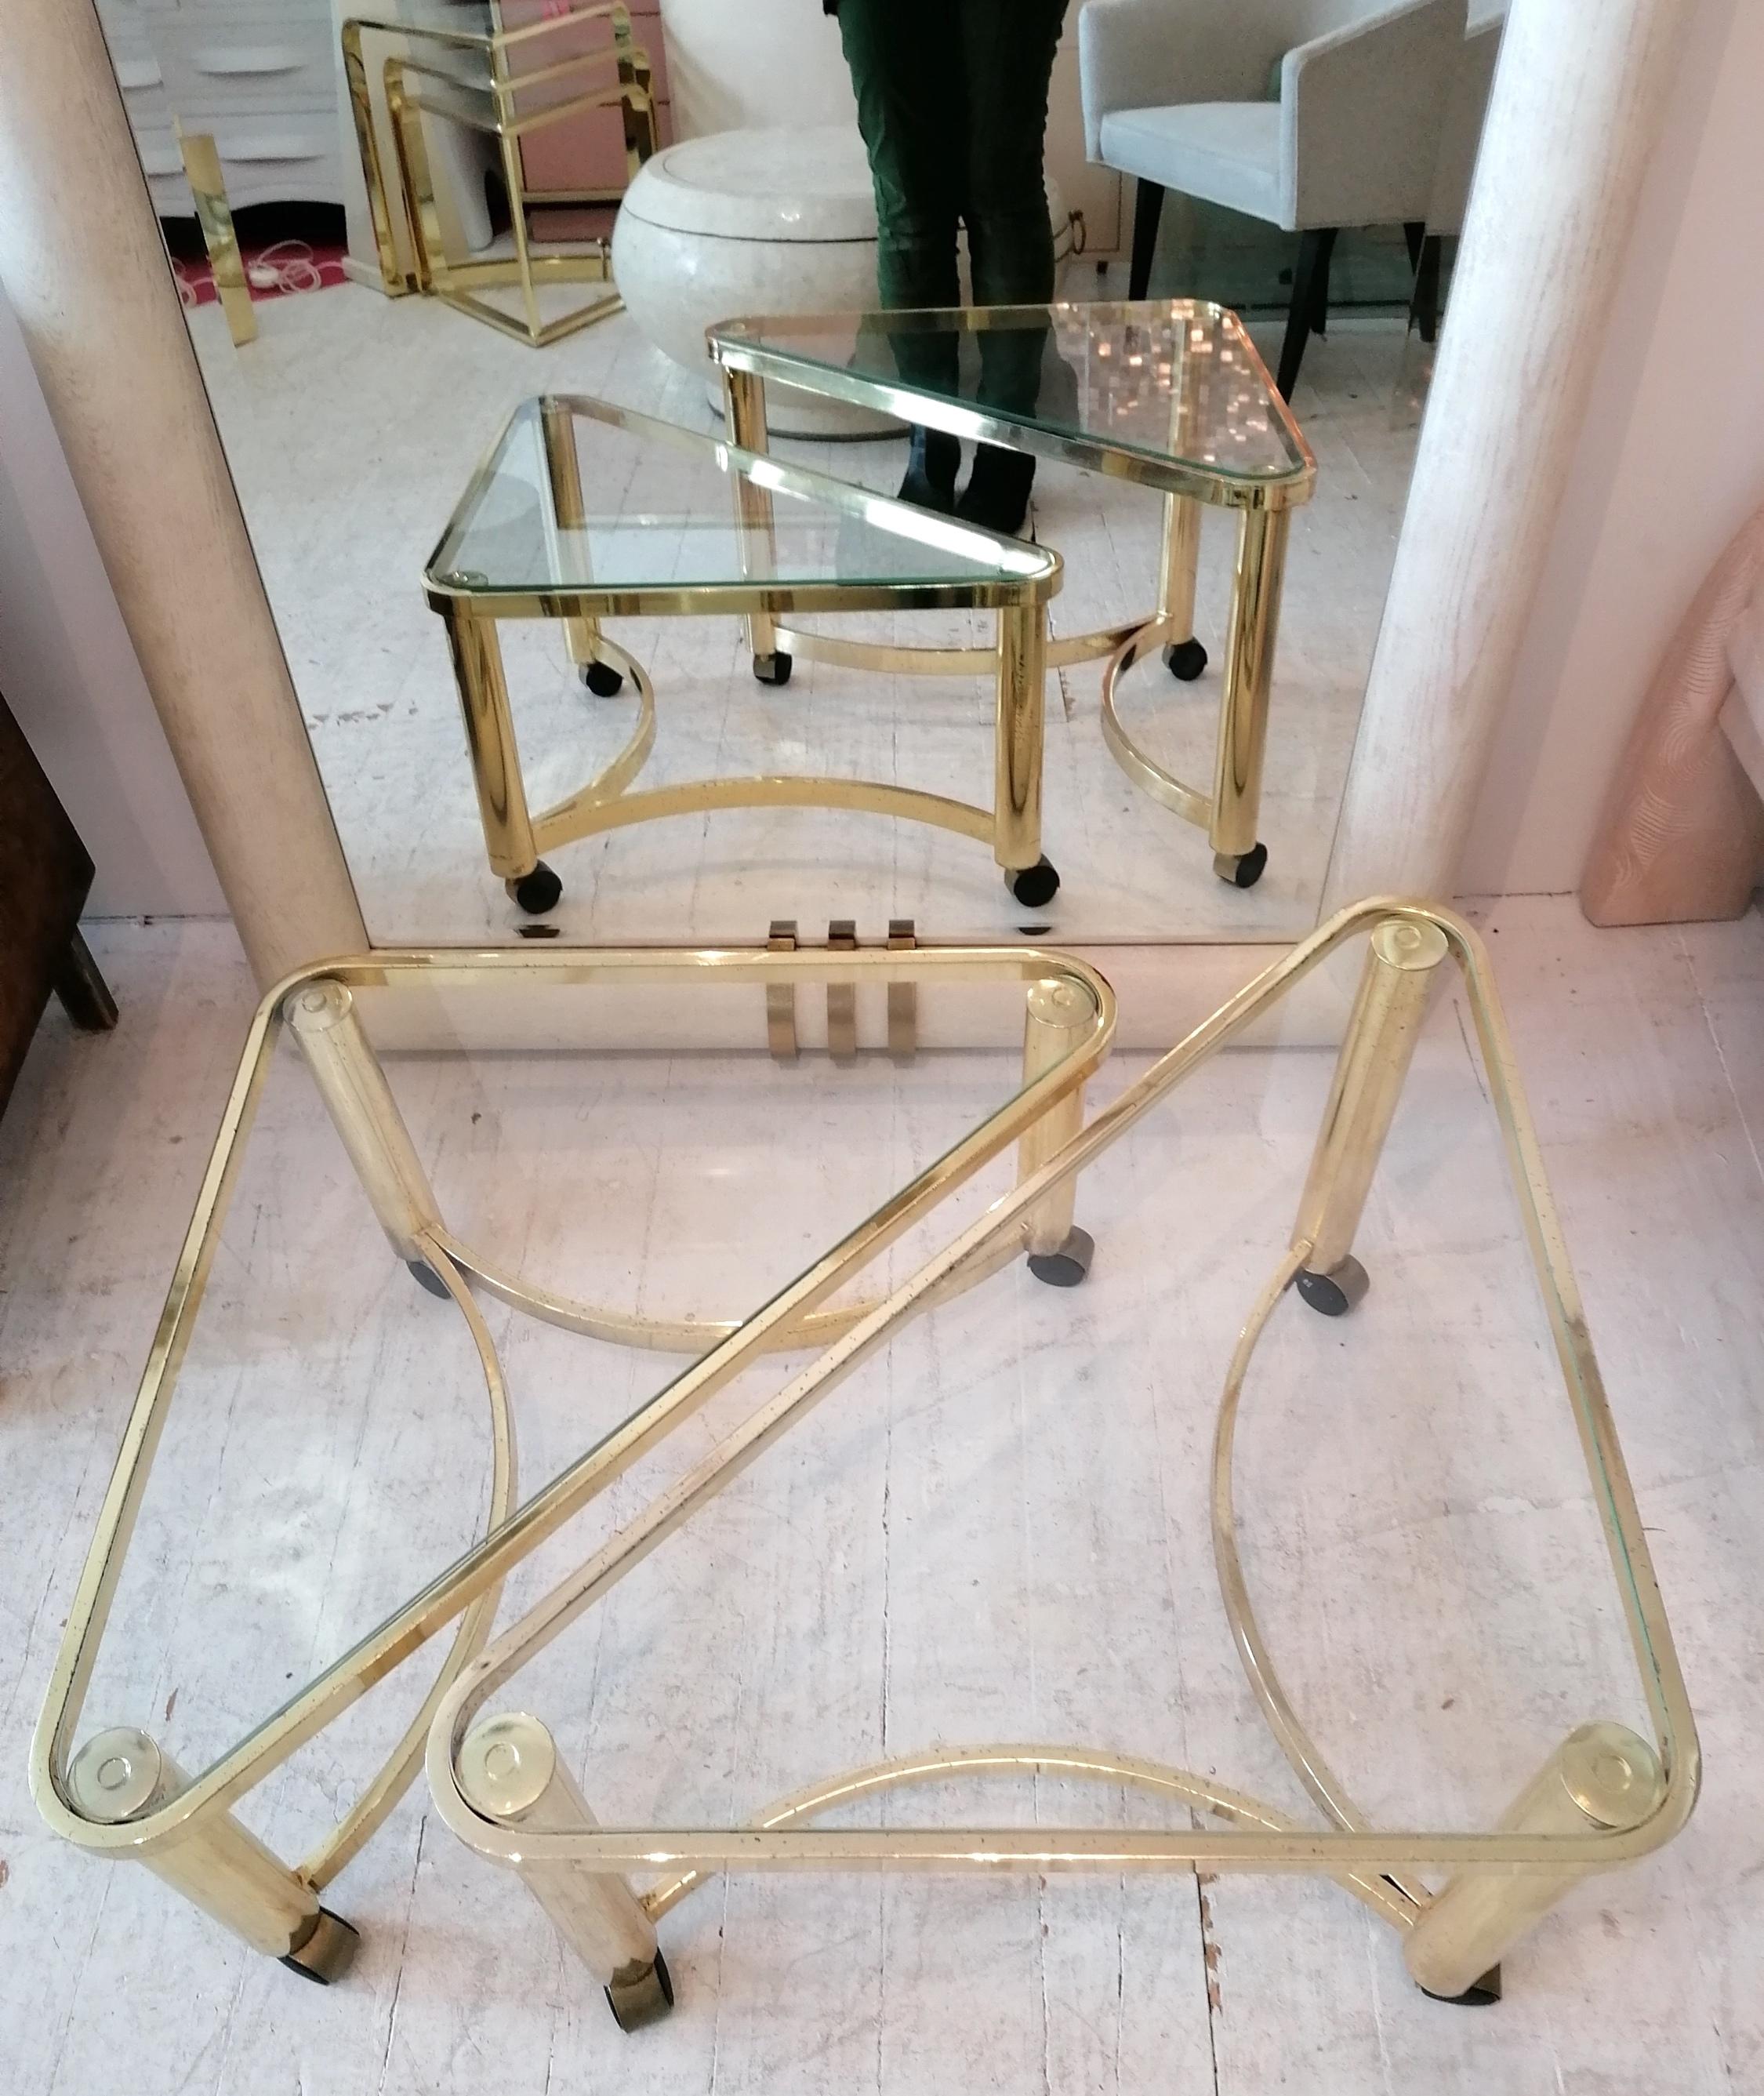 A pair of Postmodern triangular gold-plate metal nesting tables with inset glass tops, on casters, by the prestigious Design Institute of America, USA, 1980s (labelled). These can be used as coffee tables or side tables.

Dimensions:
Large- width